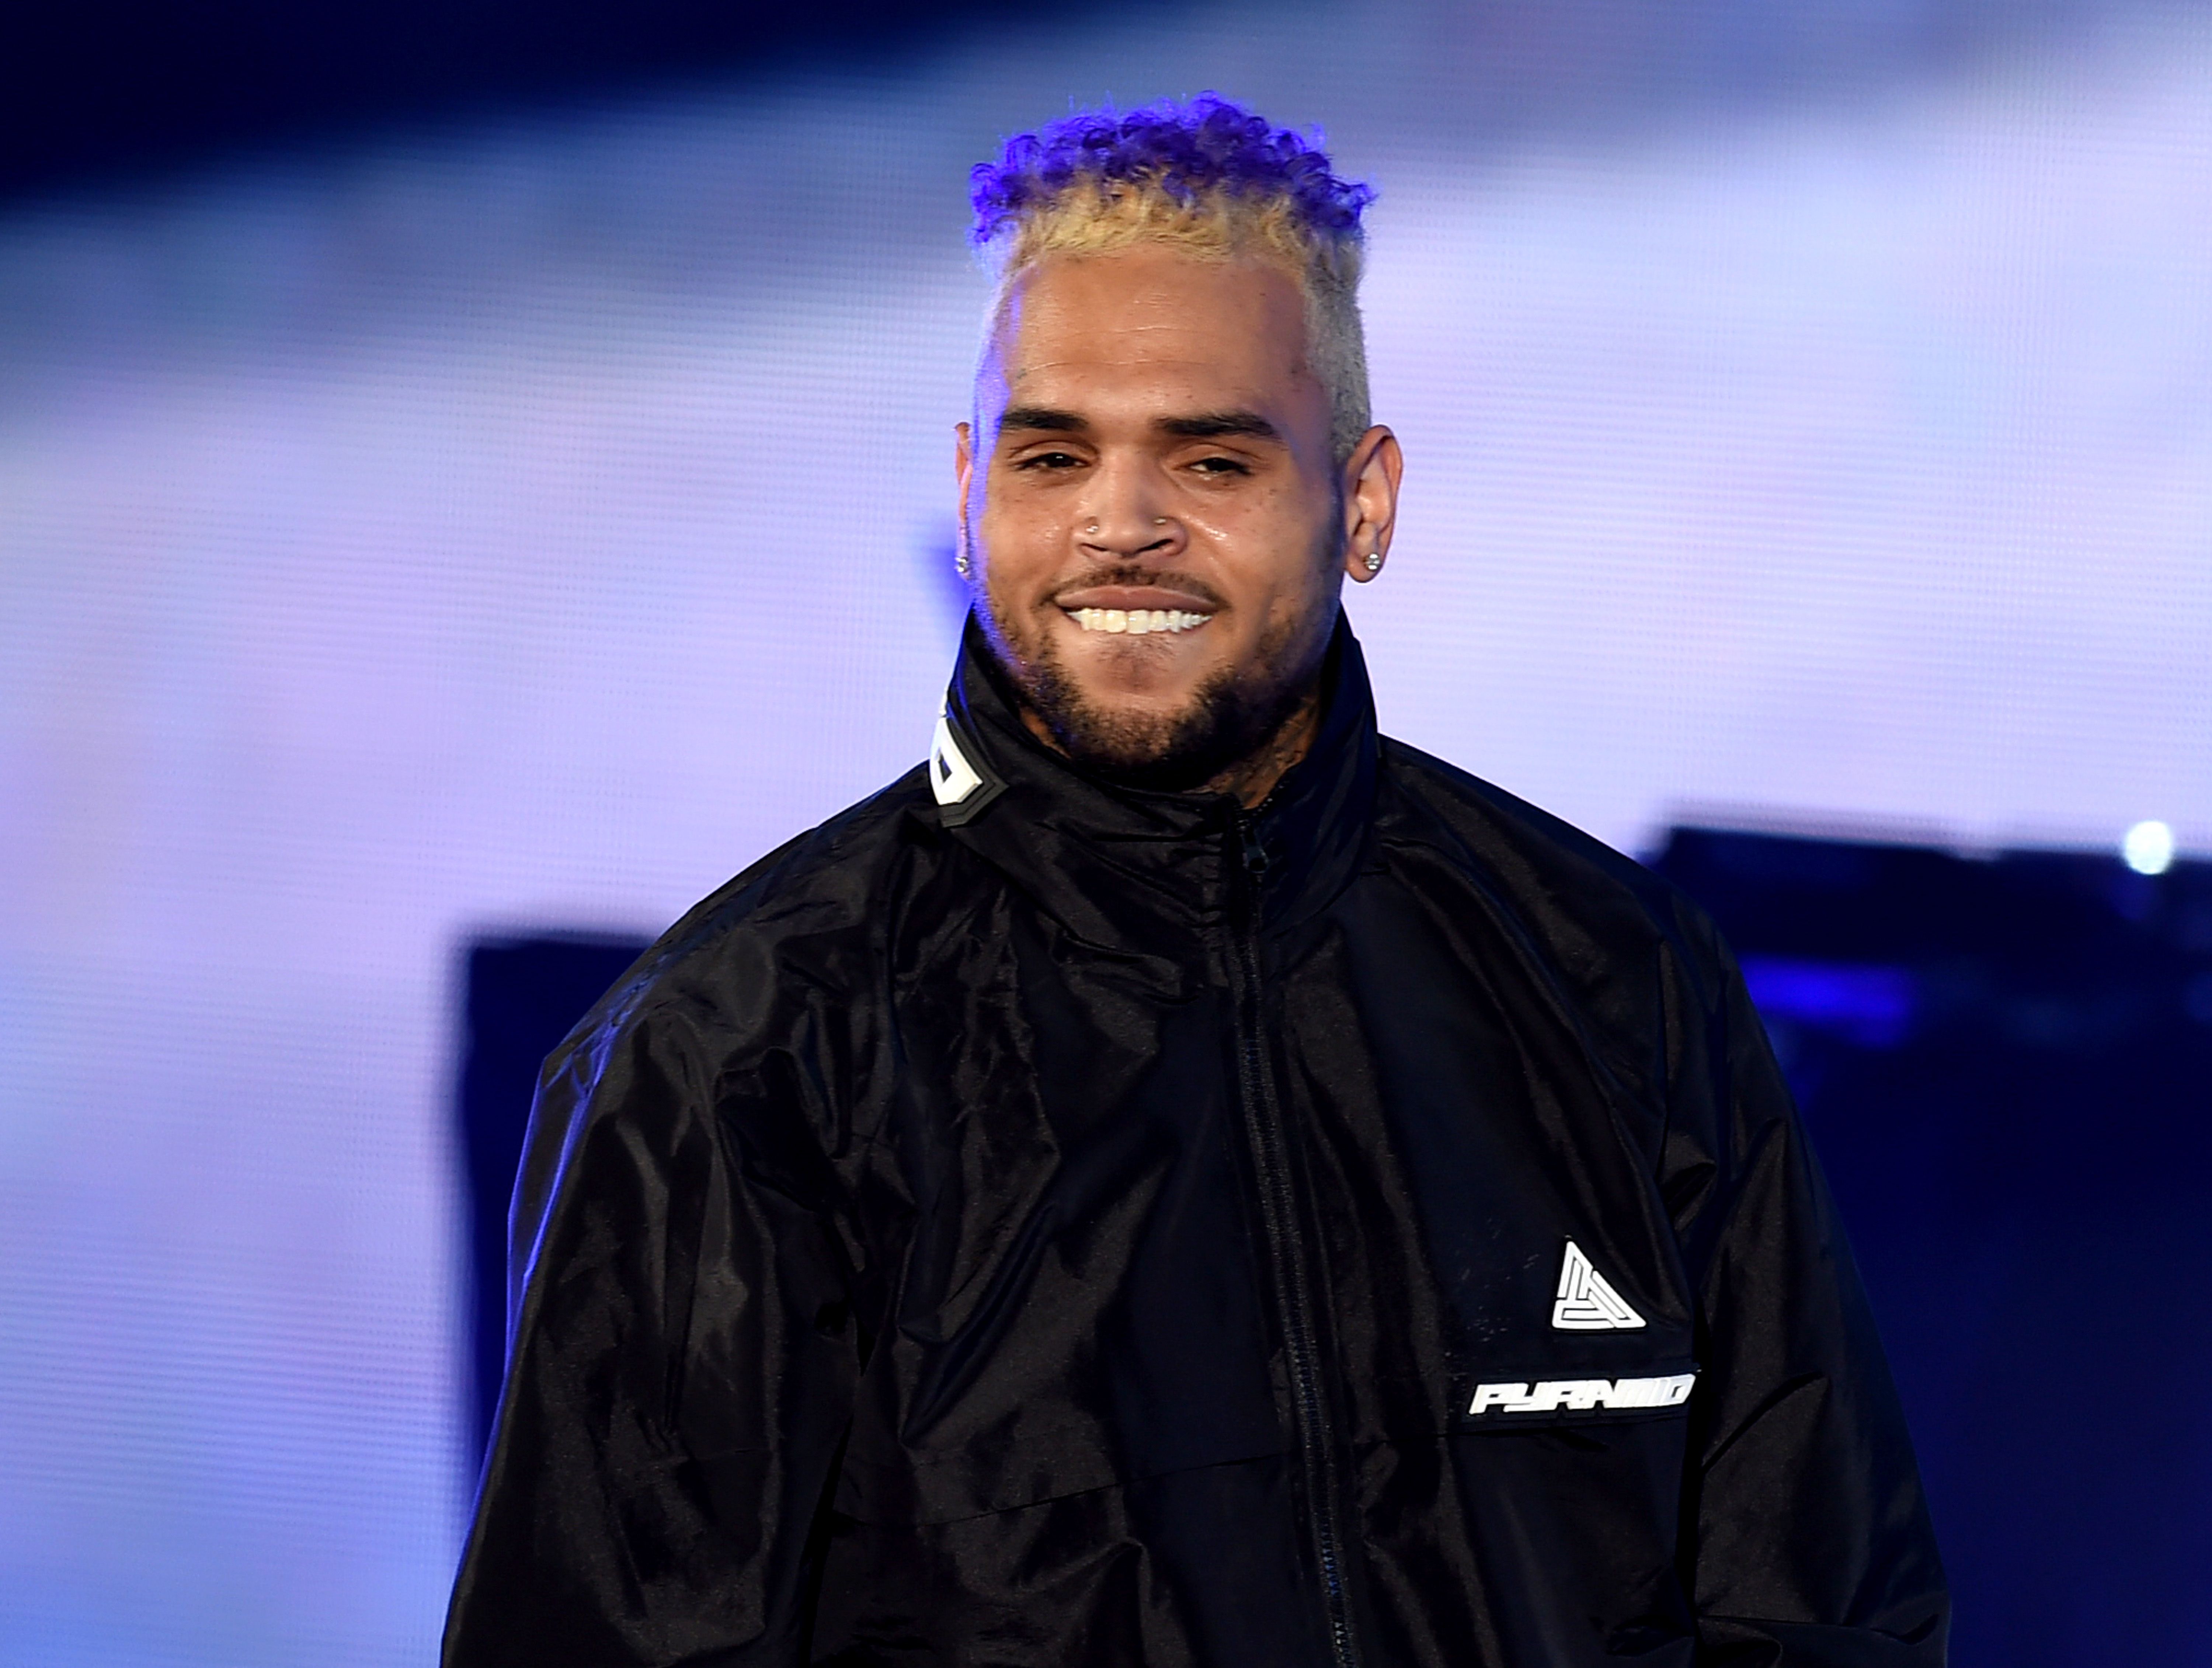 Chris Brown performing onstage at The Hollywood Bowl on October 20, 2018 in Los Angeles. │Photo: Getty Images